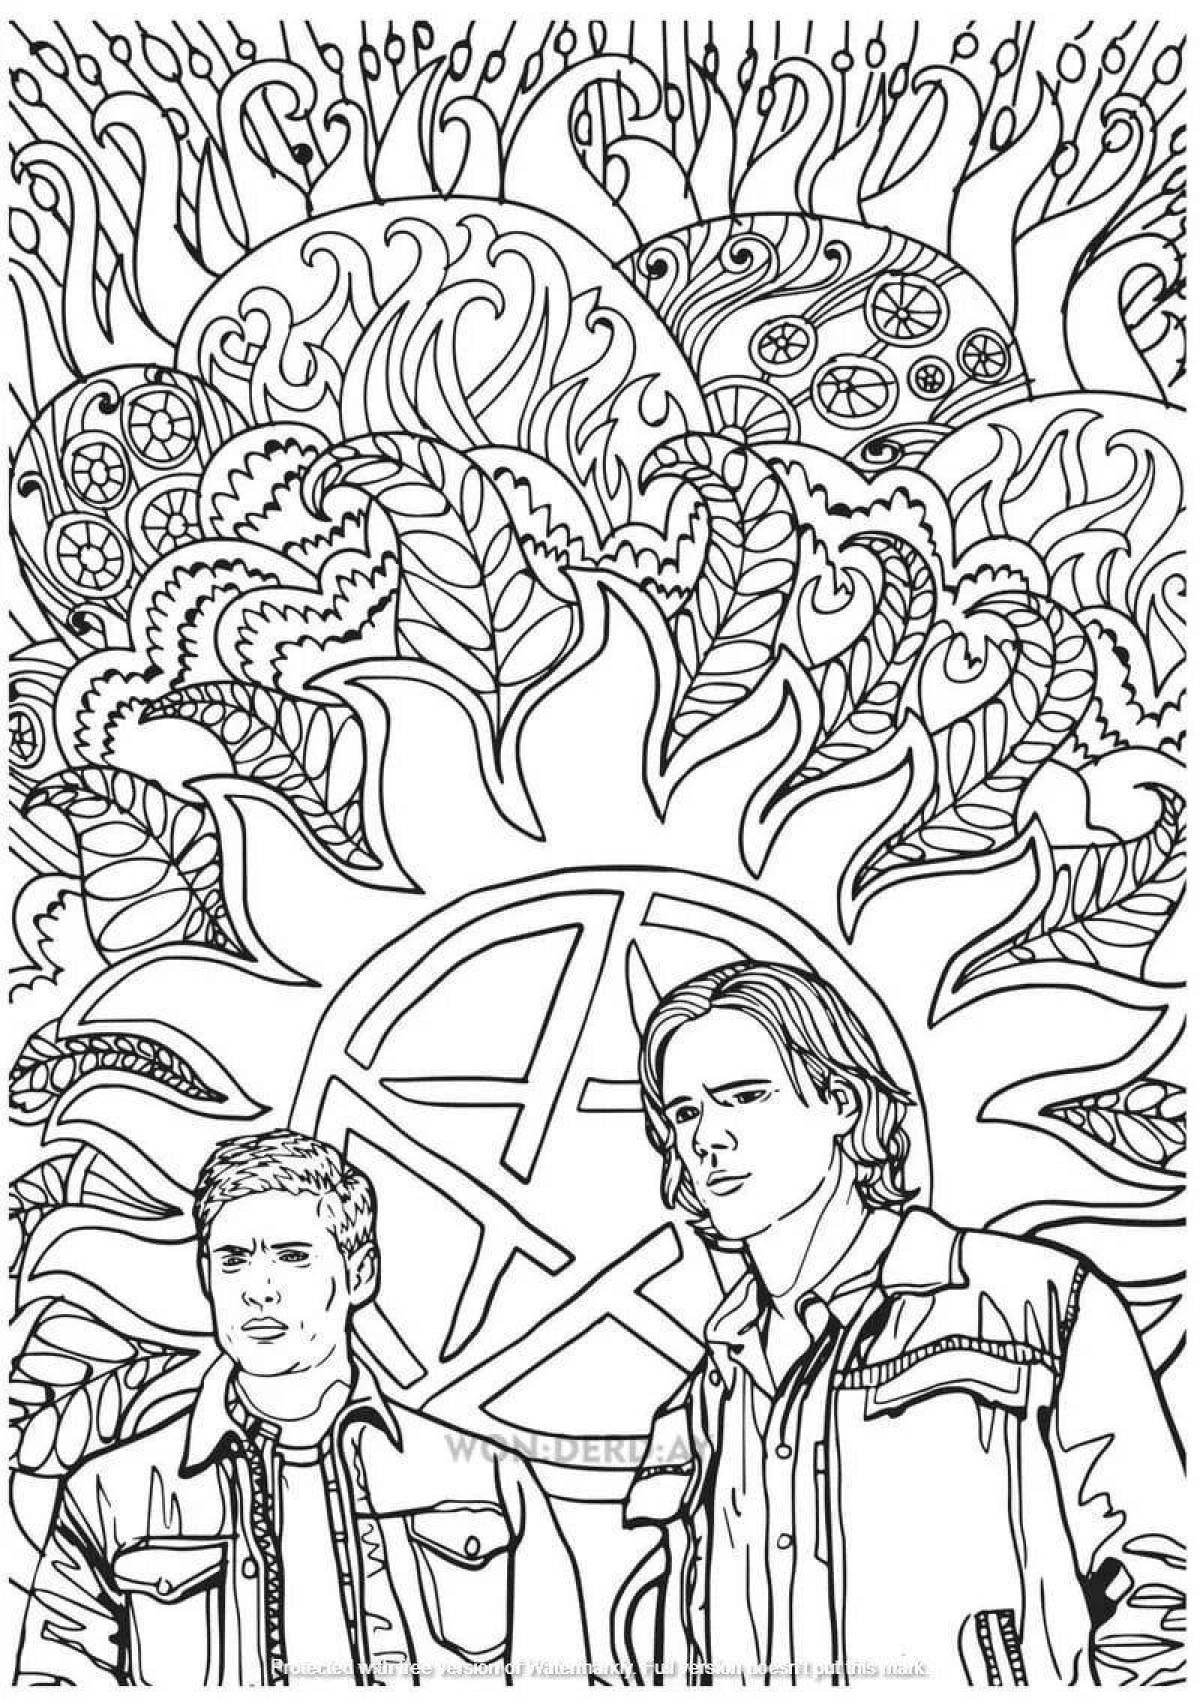 Funny supernatural academy coloring page